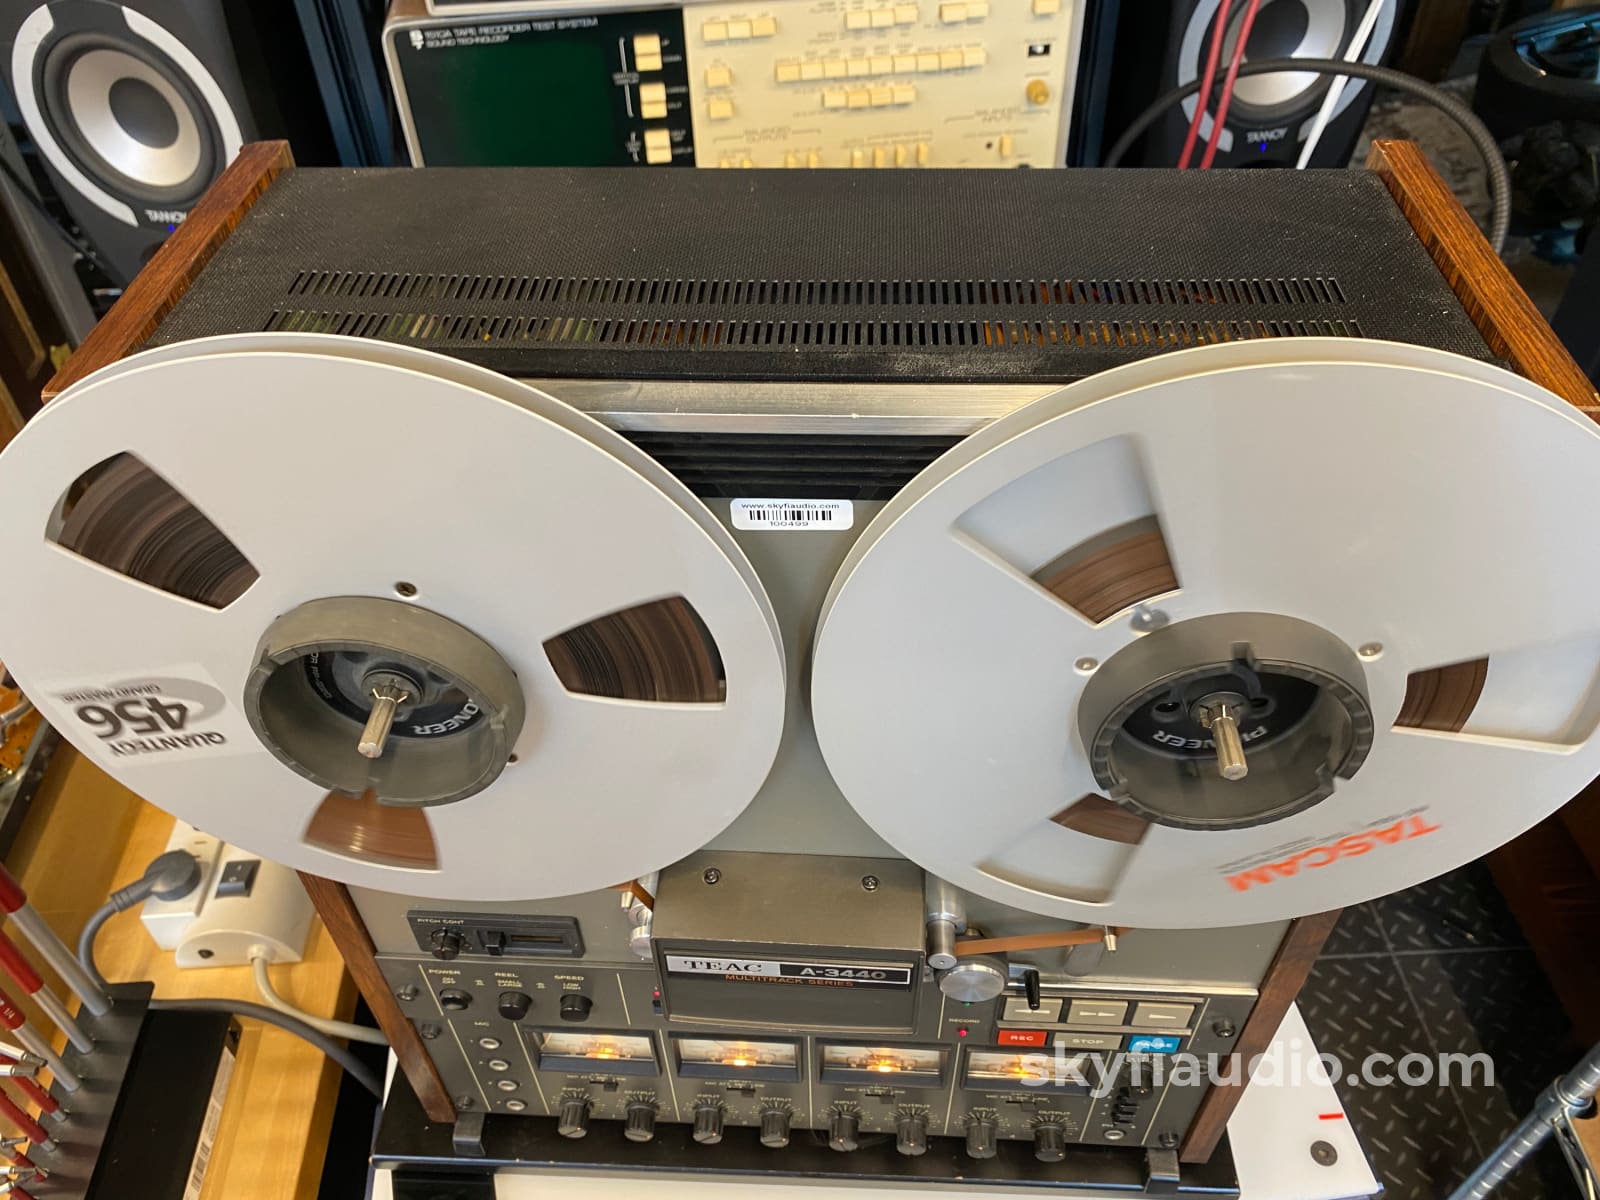 https://skyfiaudio.com/cdn/shop/products/teac-a-3440-4-channel-reel-to-playerrecorder-tape-deck-984.jpg?v=1674018840&width=1600